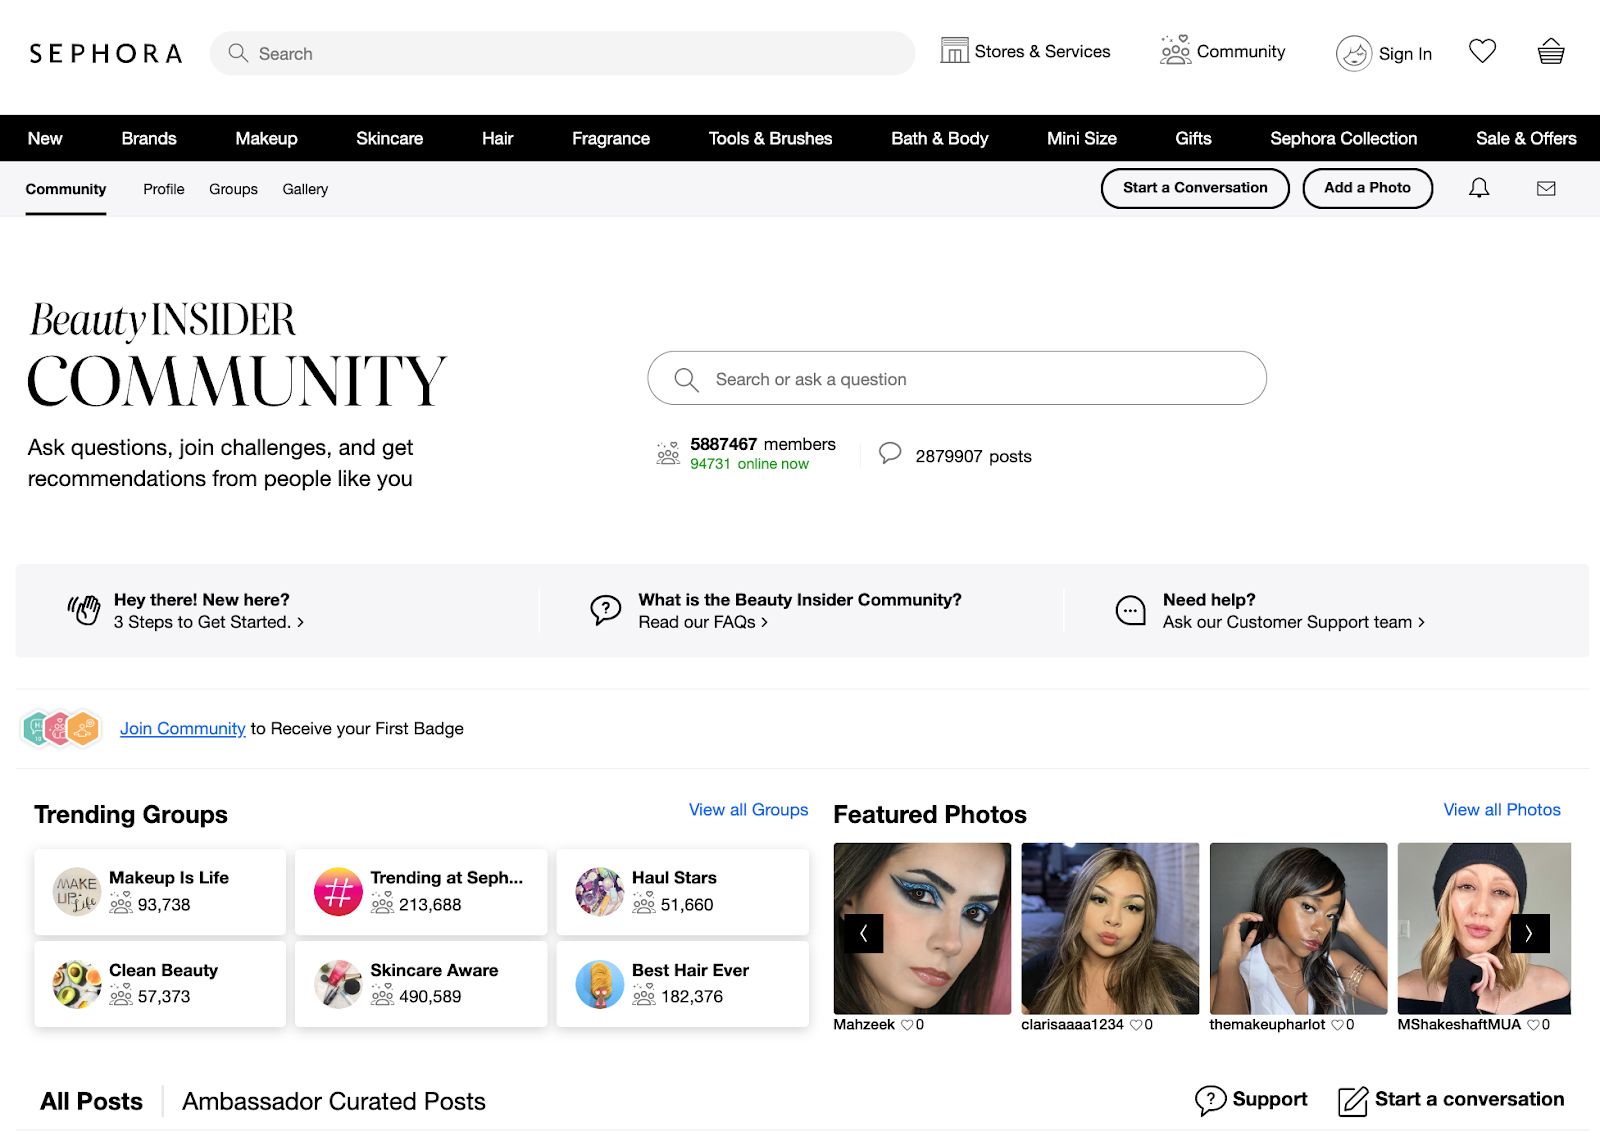 Sephora has an online community on its website where members can learn about fashion trends and ask questions.